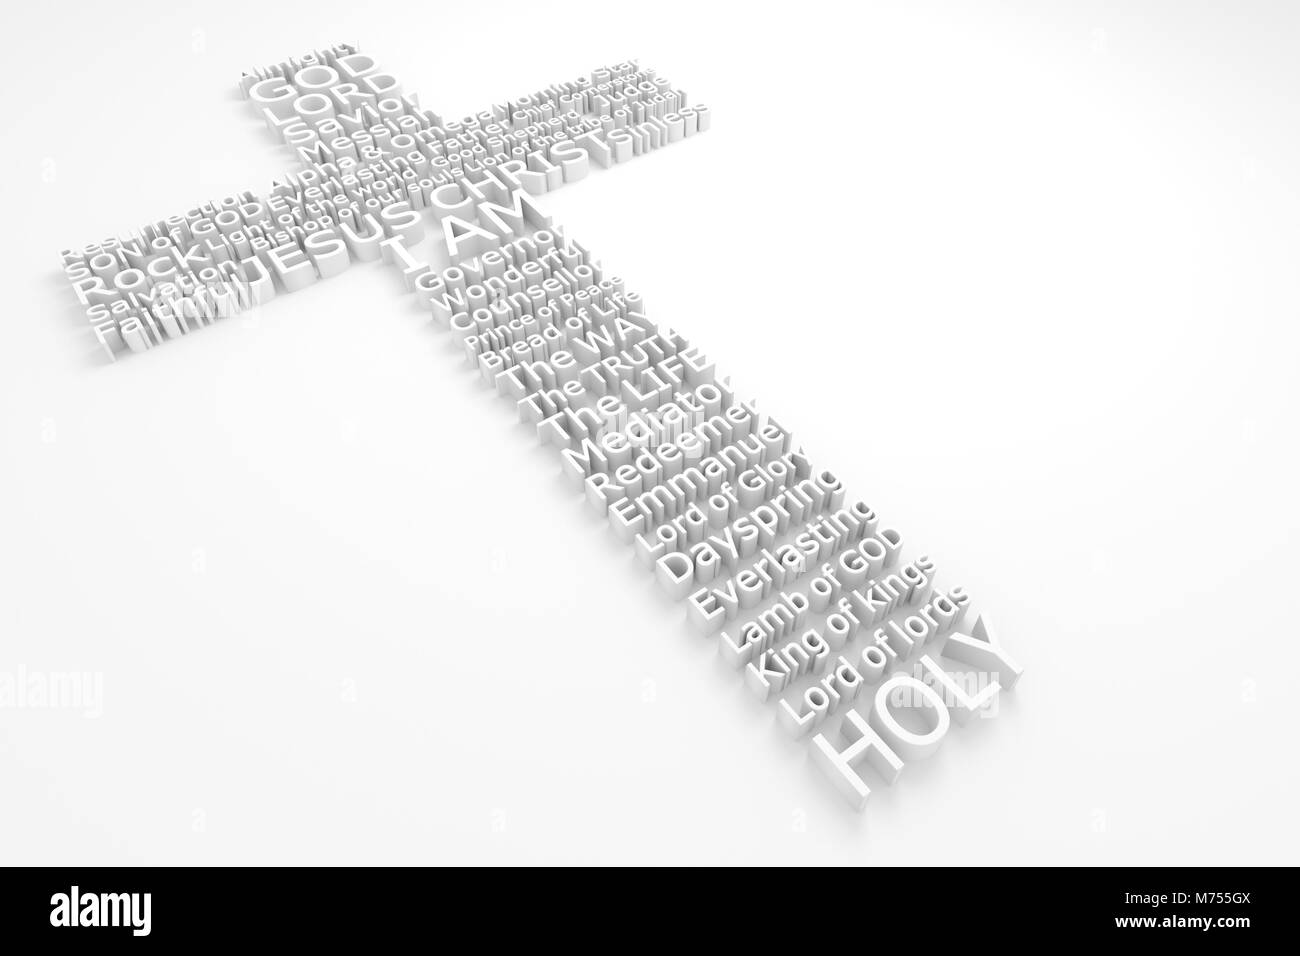 3D Cross Made Composed of The Many Biblical Names of JESUS CHRIST Stock Photo